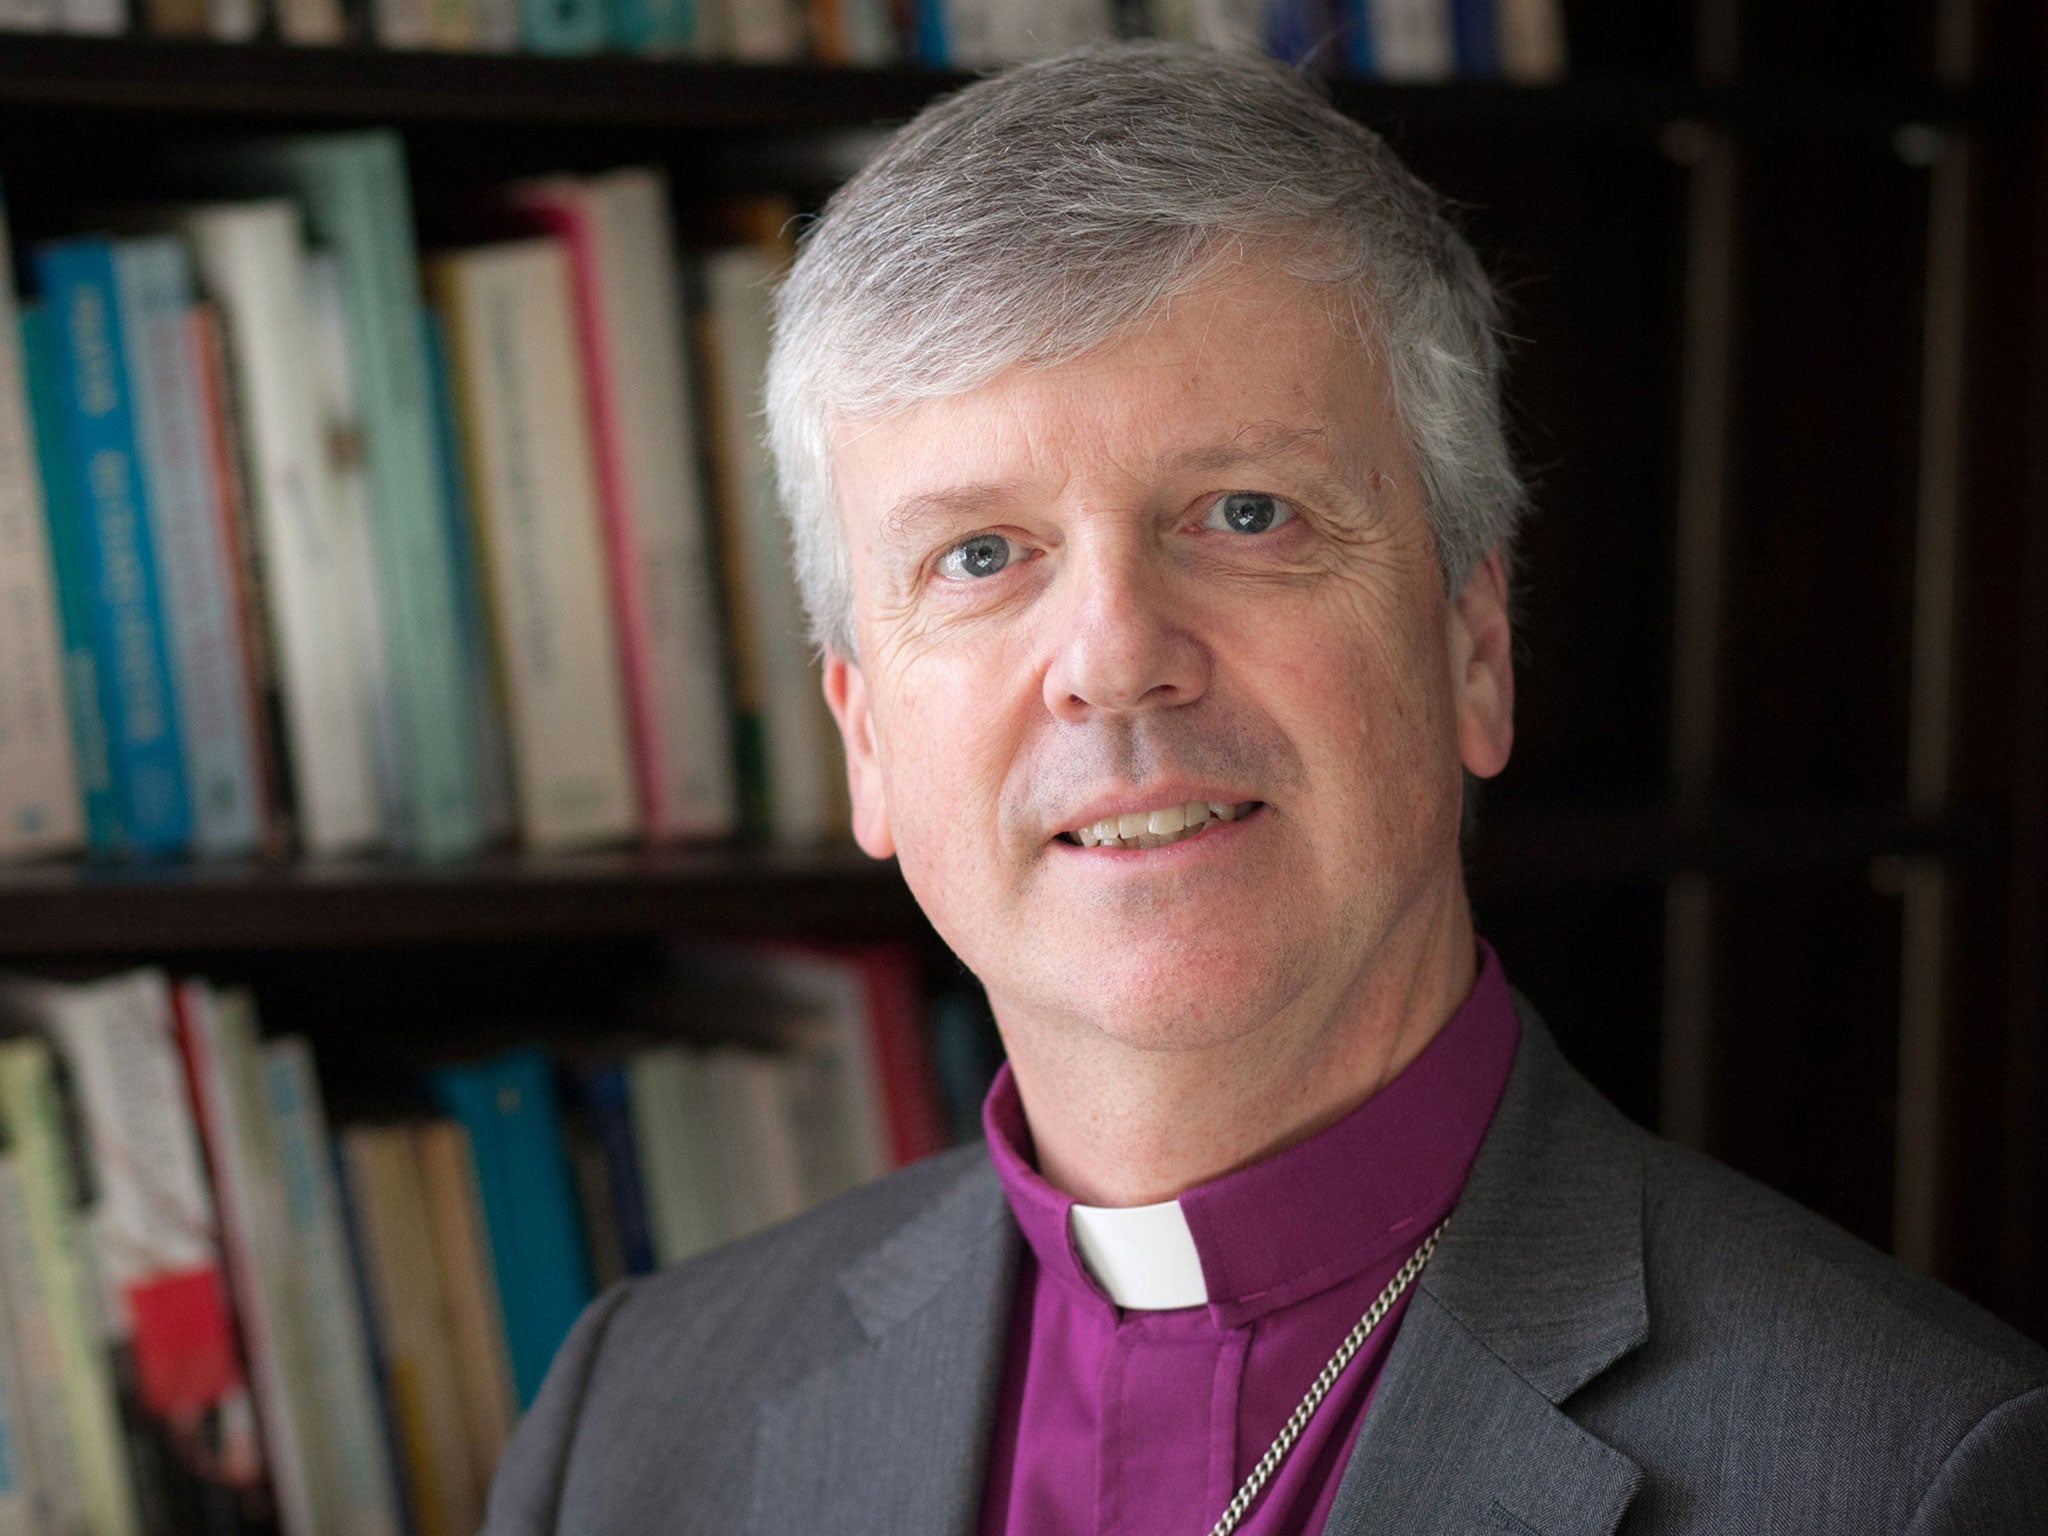 Bishop of Guildford Andrew Watson who has alleged he was a victim of abuse carried out by a former colleague of the Archbishop of Canterbury